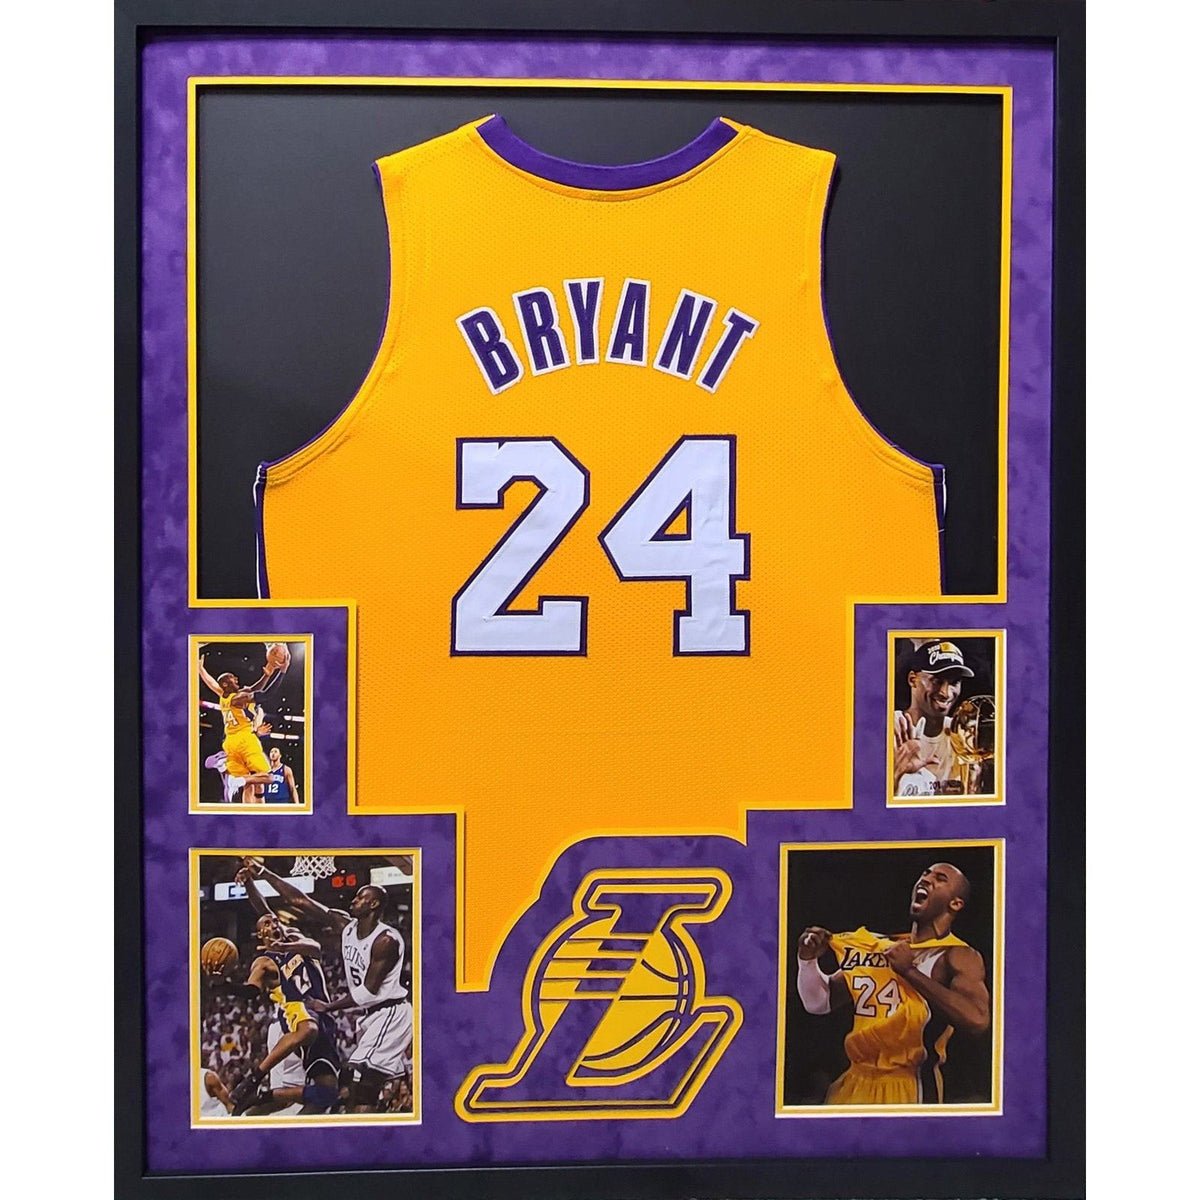 Kobe Bryant UNSIGNED Framed Jersey Los Angeles Lakers L.A. PB4